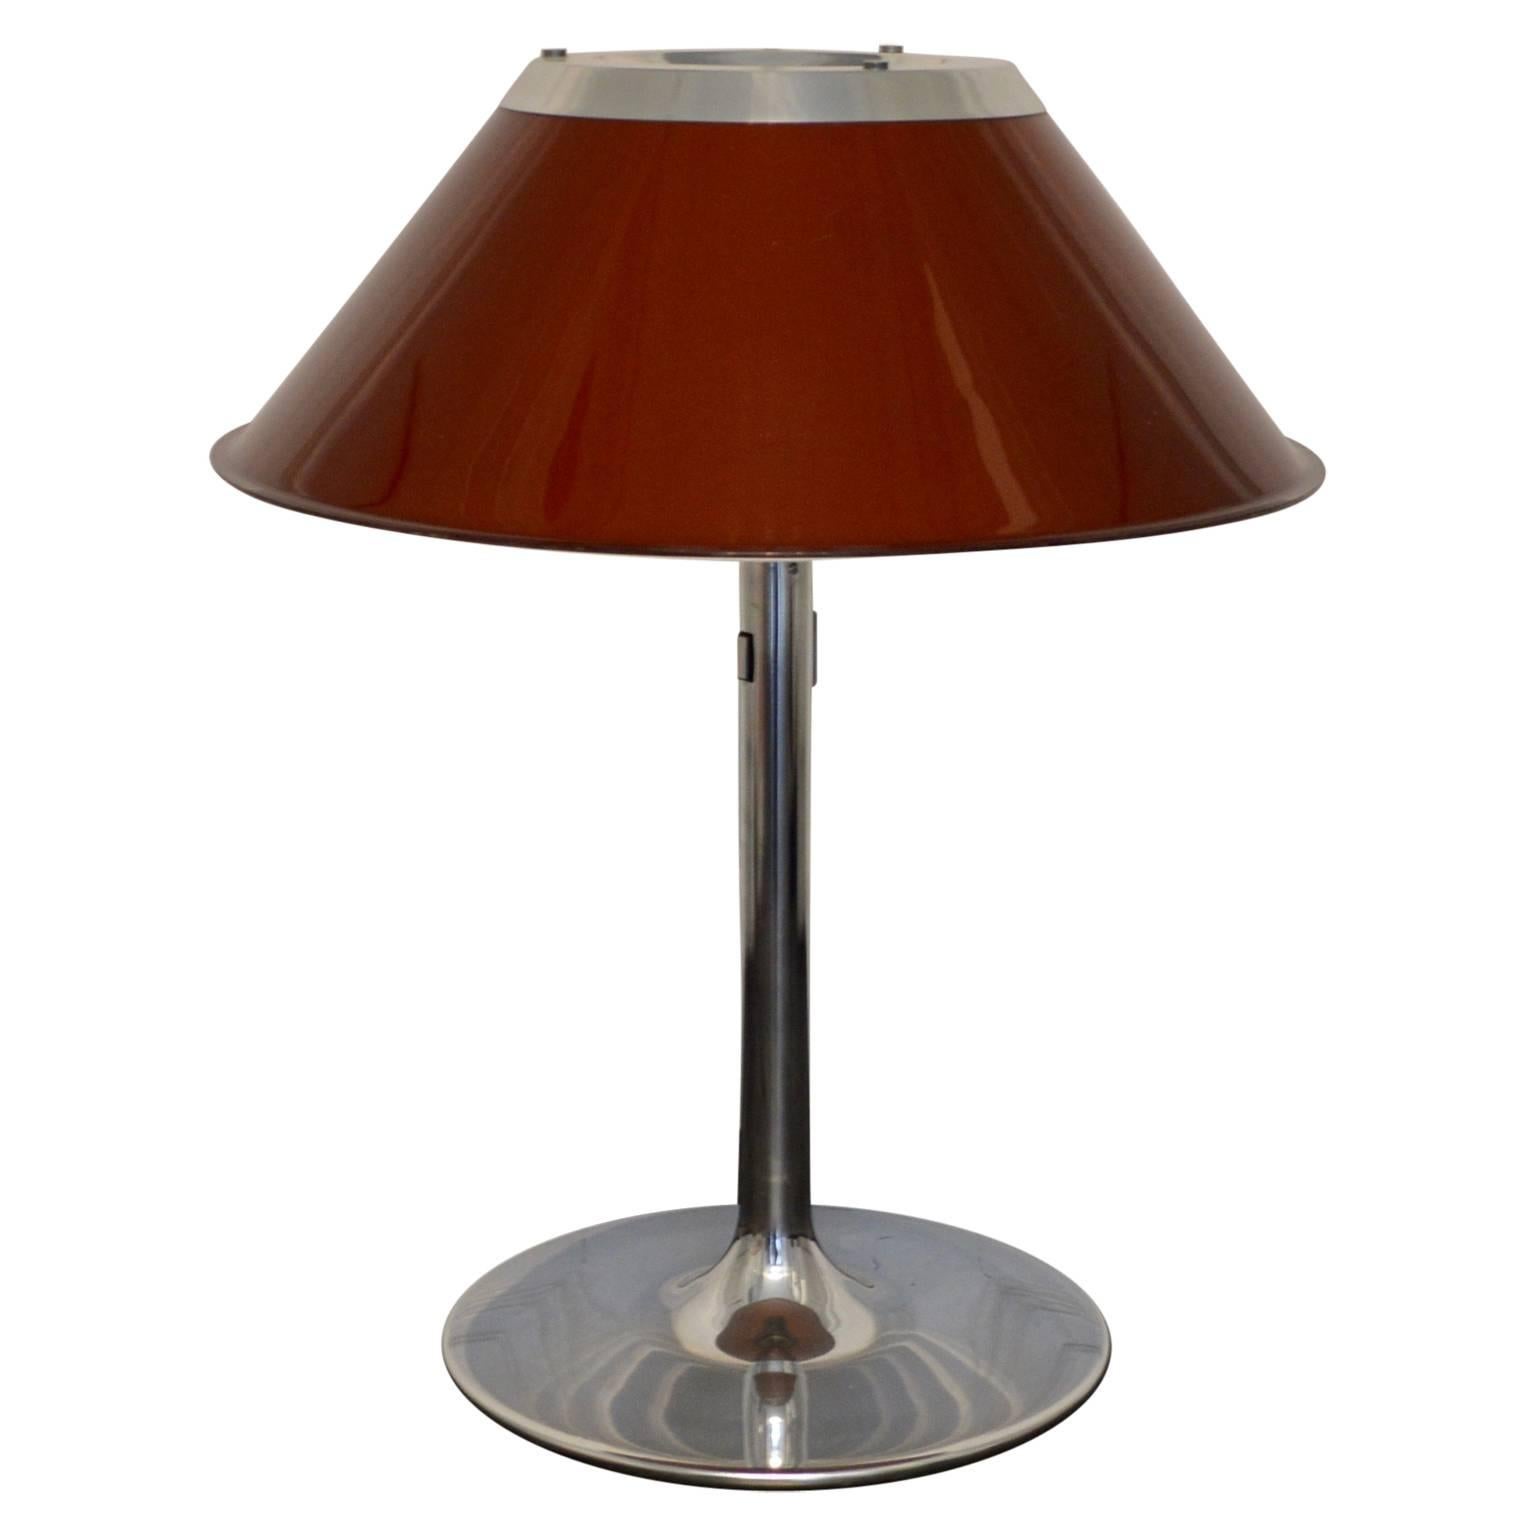 Swedish Atelje Lyktan table lamp designed by Per Sundstedt.
The shade is made of plastic with an perforated aluminium top and the foot is made of chromed steel.